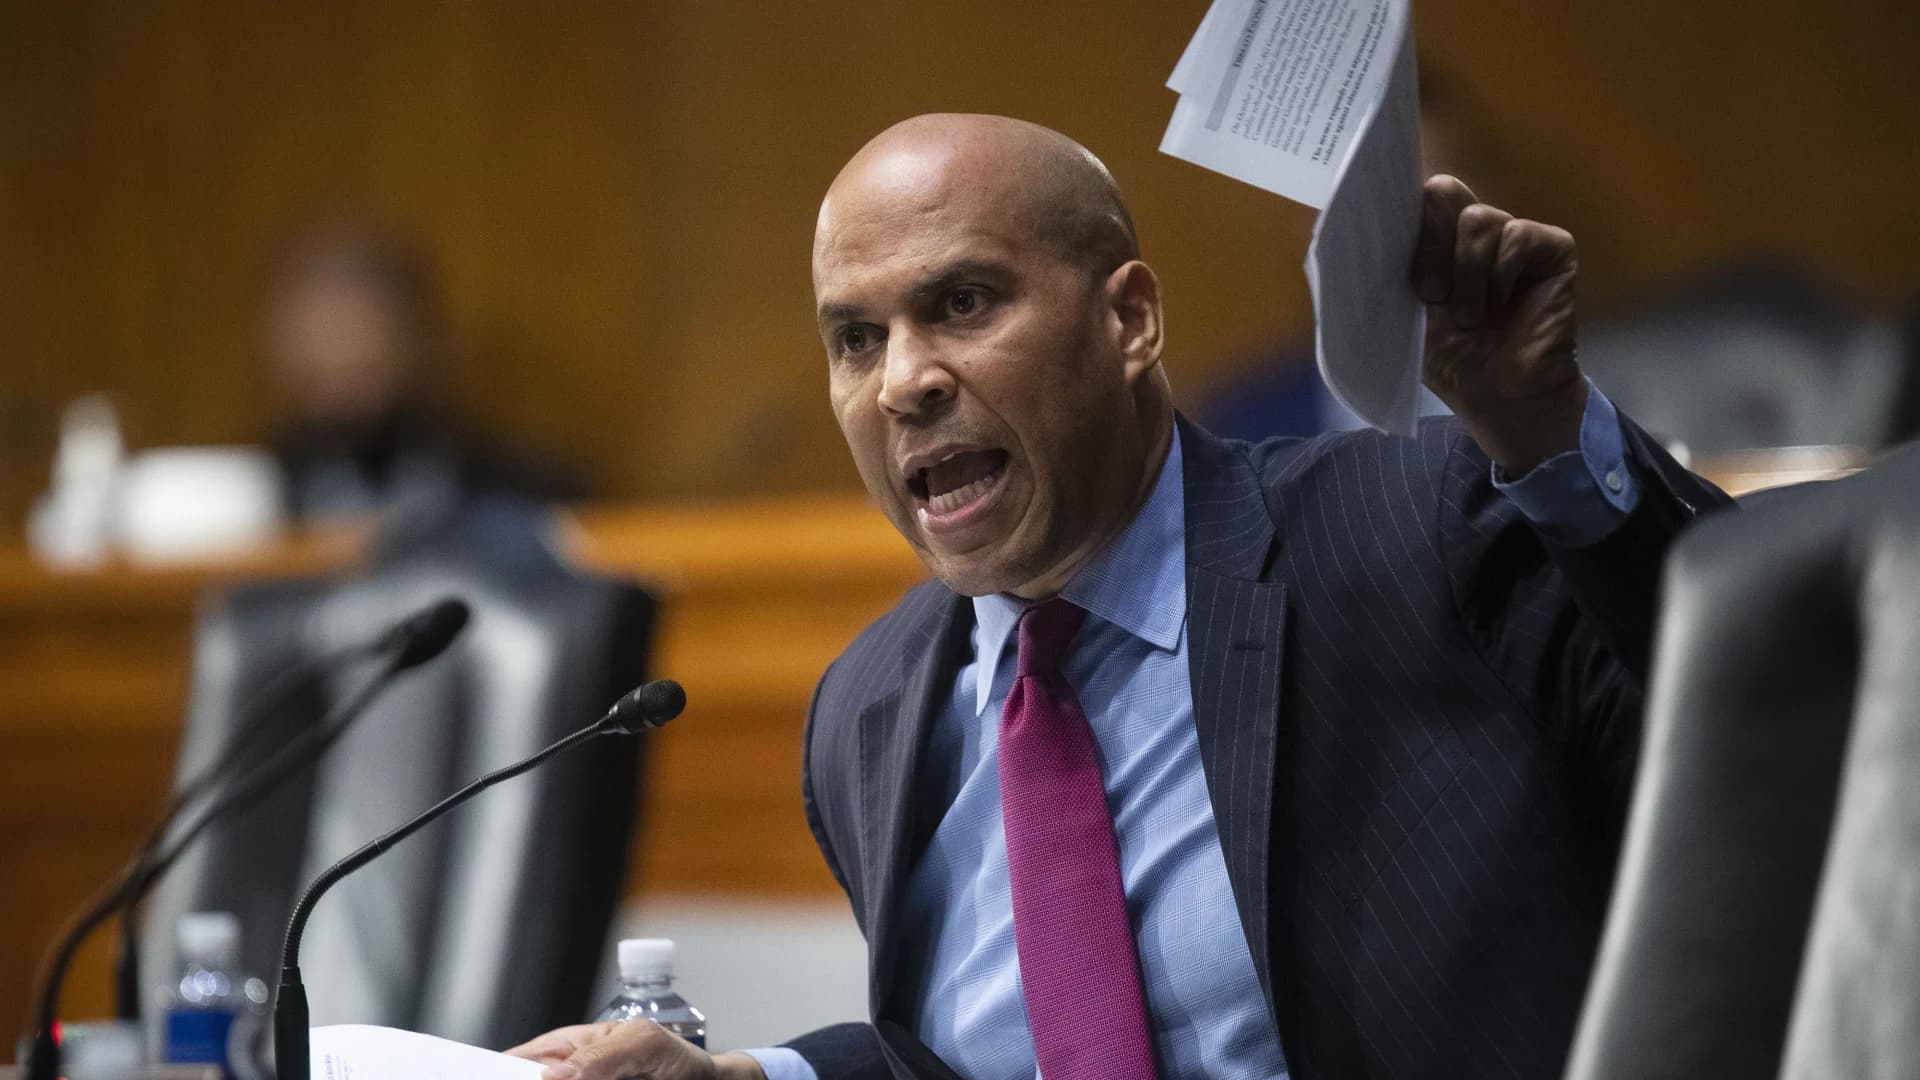 Sen. Cory Booker tests positive for COVID-19